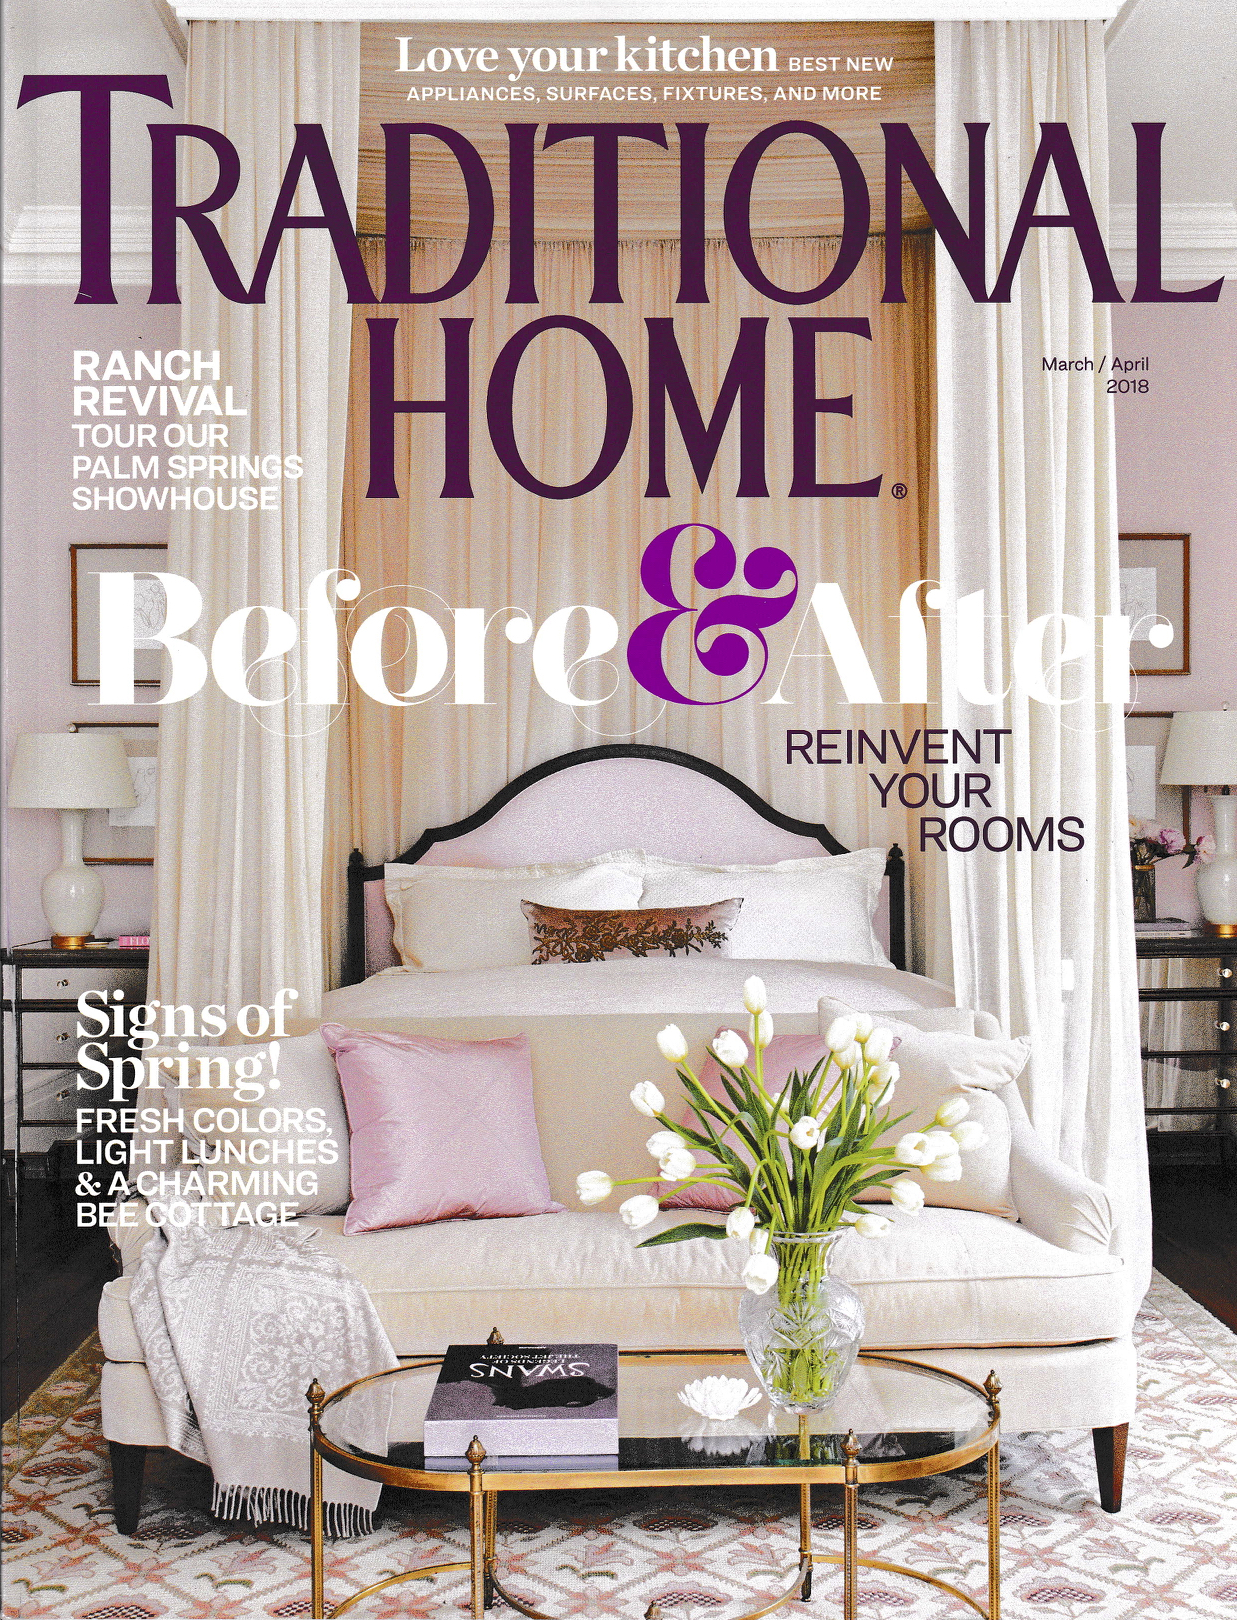 MB_TraditionalHome_cover_Mar:April18.jpg